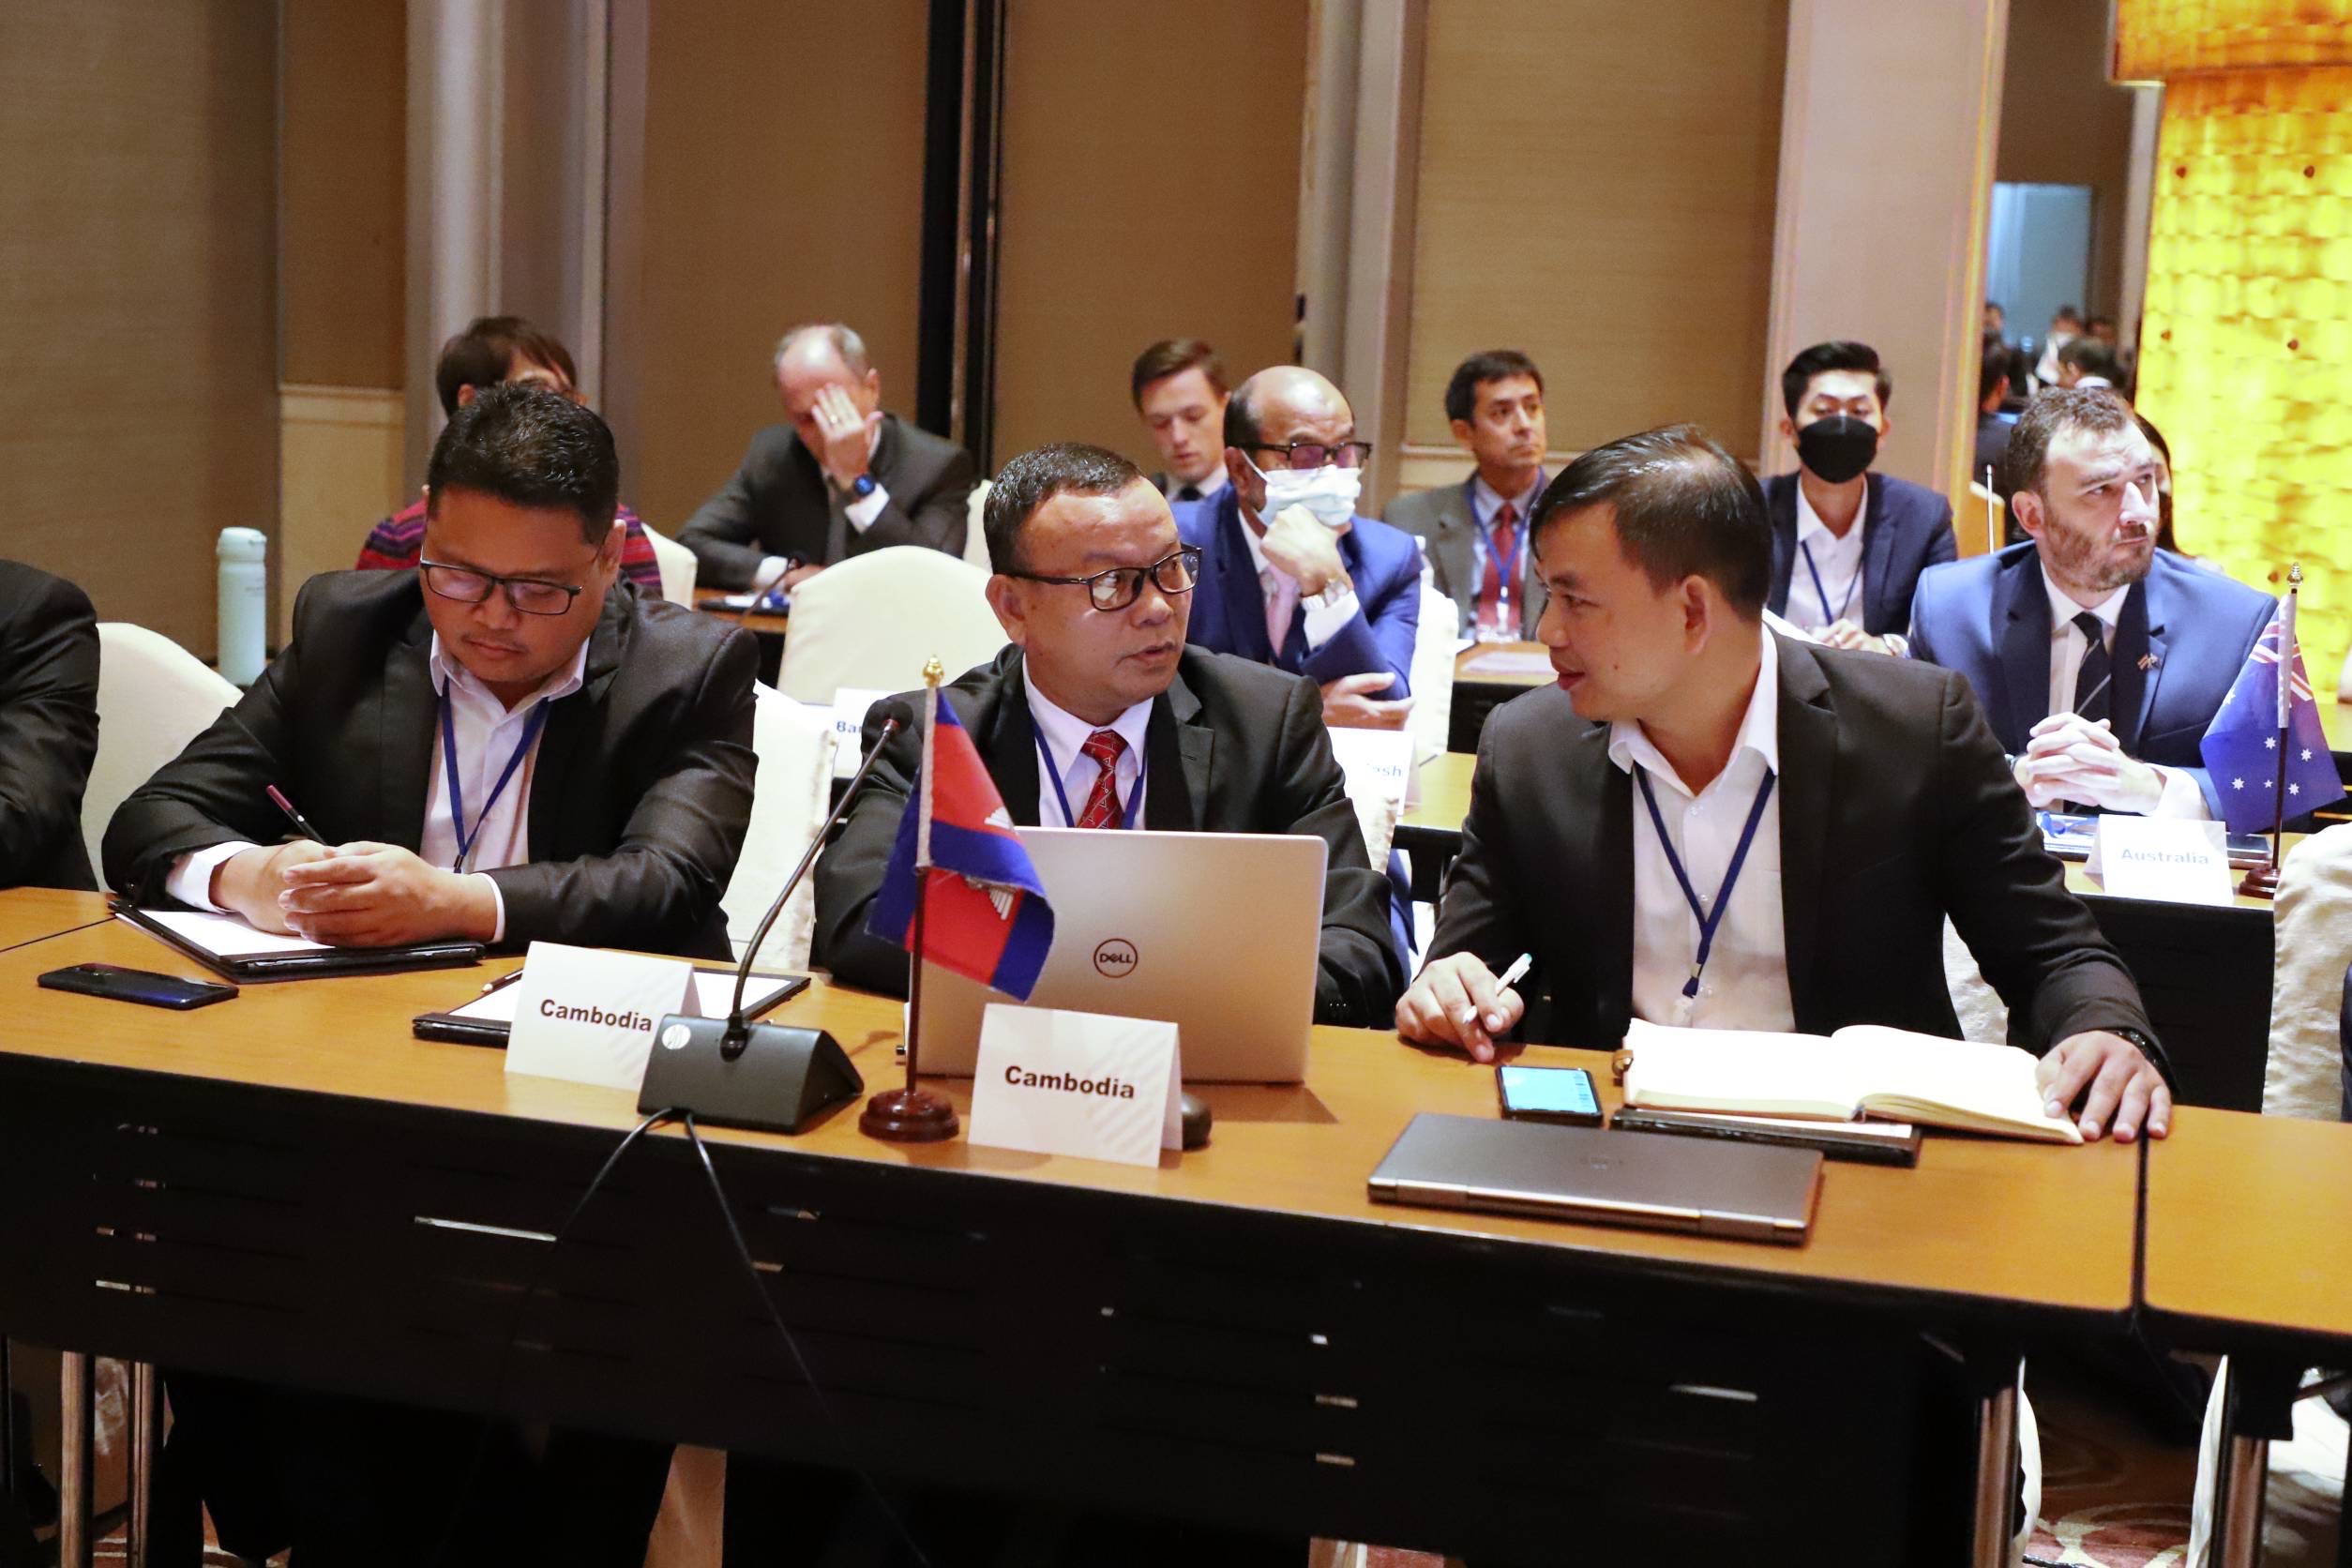 Delegates from Cambodia responding to enquiries from participating countries